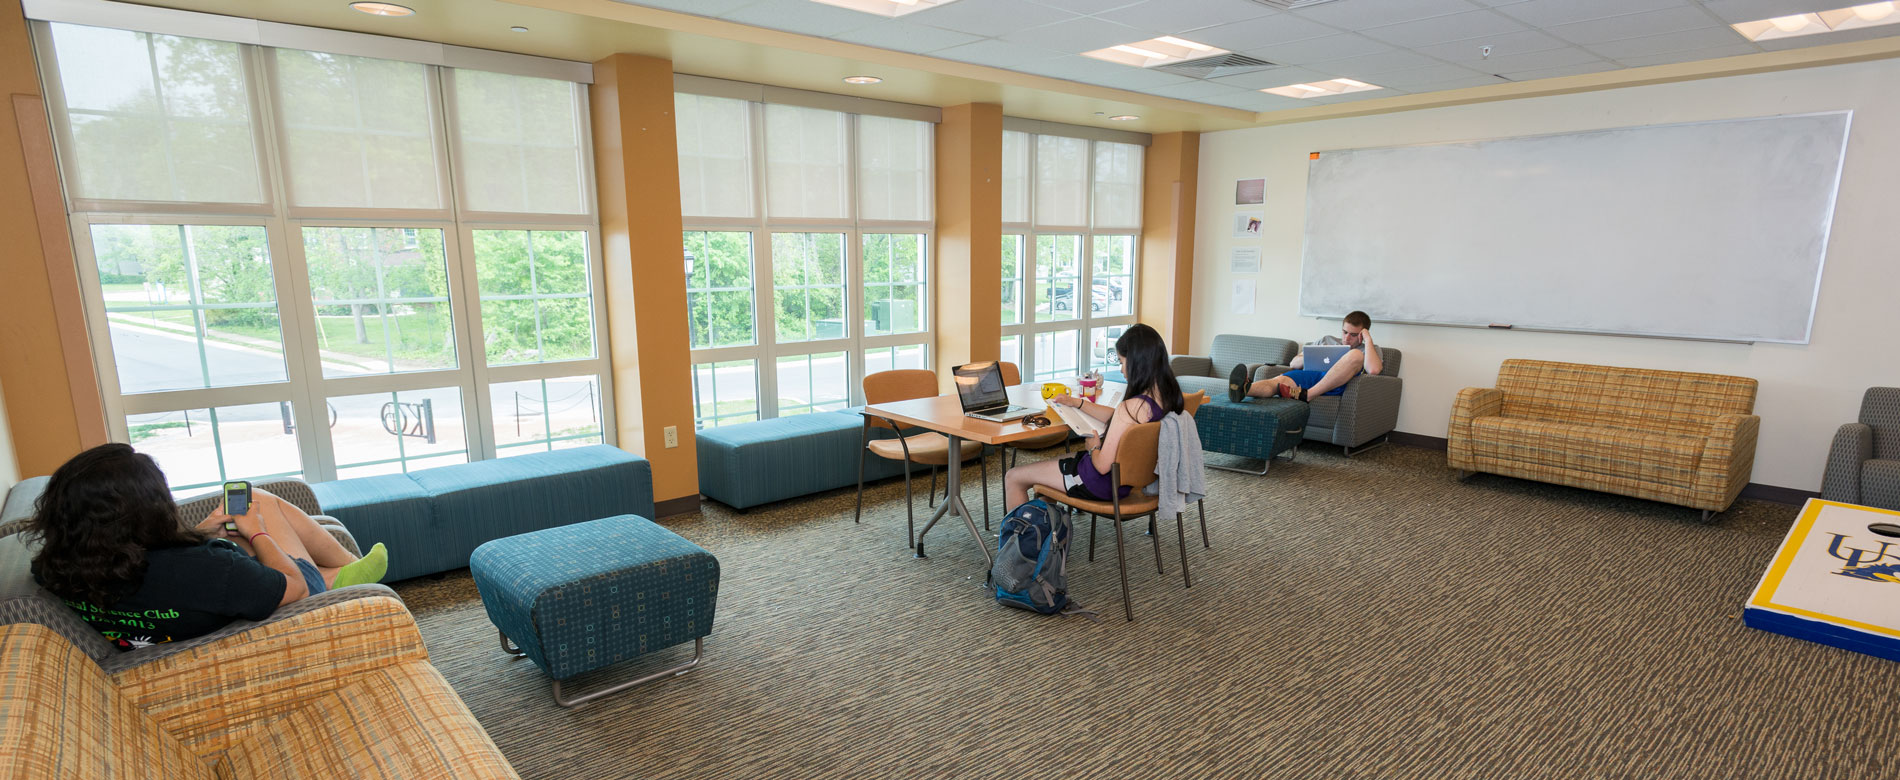 Students relaxing and studying in lounge with comfortable chairs and sofas